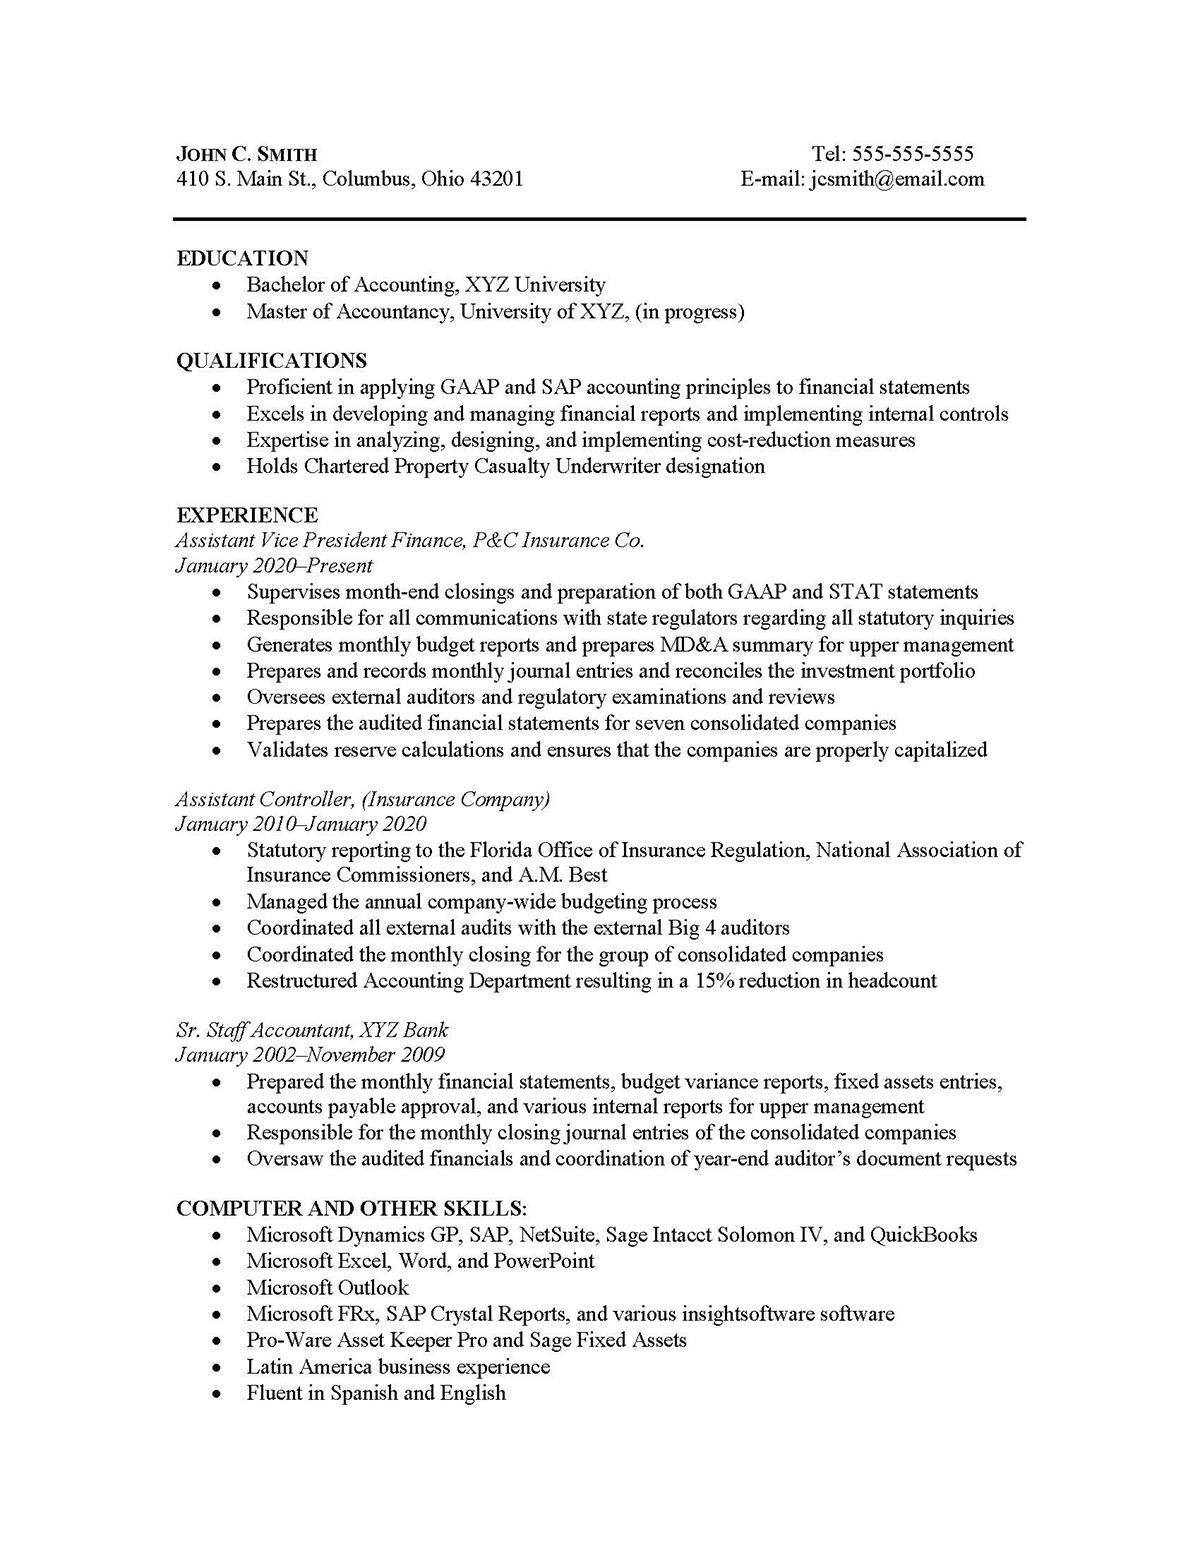 Sample resume: Accounting, High Experience, Combination